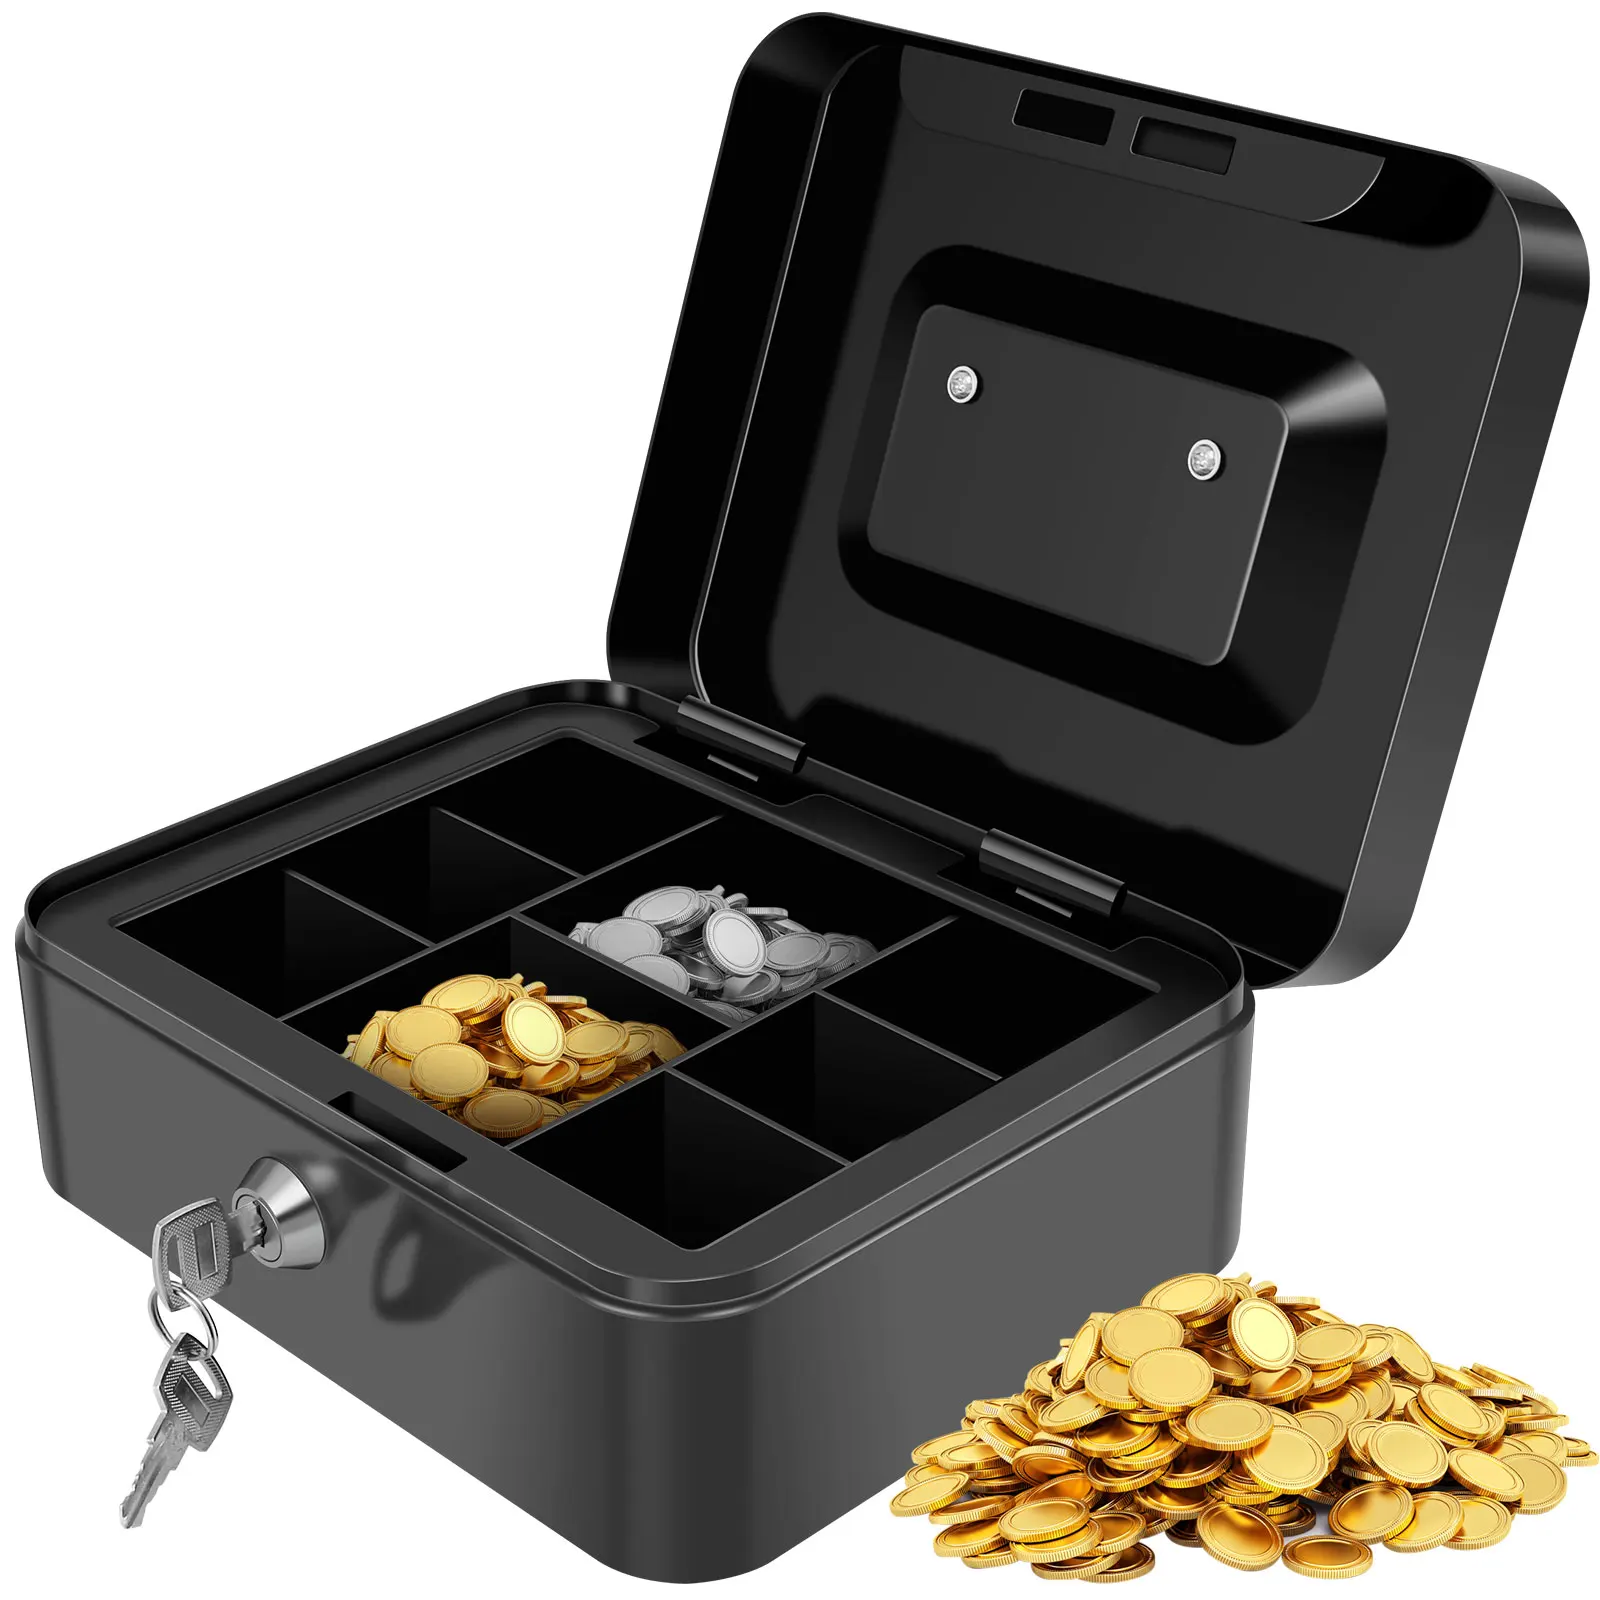 

Cash Box with Money Tray and Lock Metal Money Box with 8 Compartment Tray 7.8×6.2×3.5 Inches Portable Metal Cash Storage Box